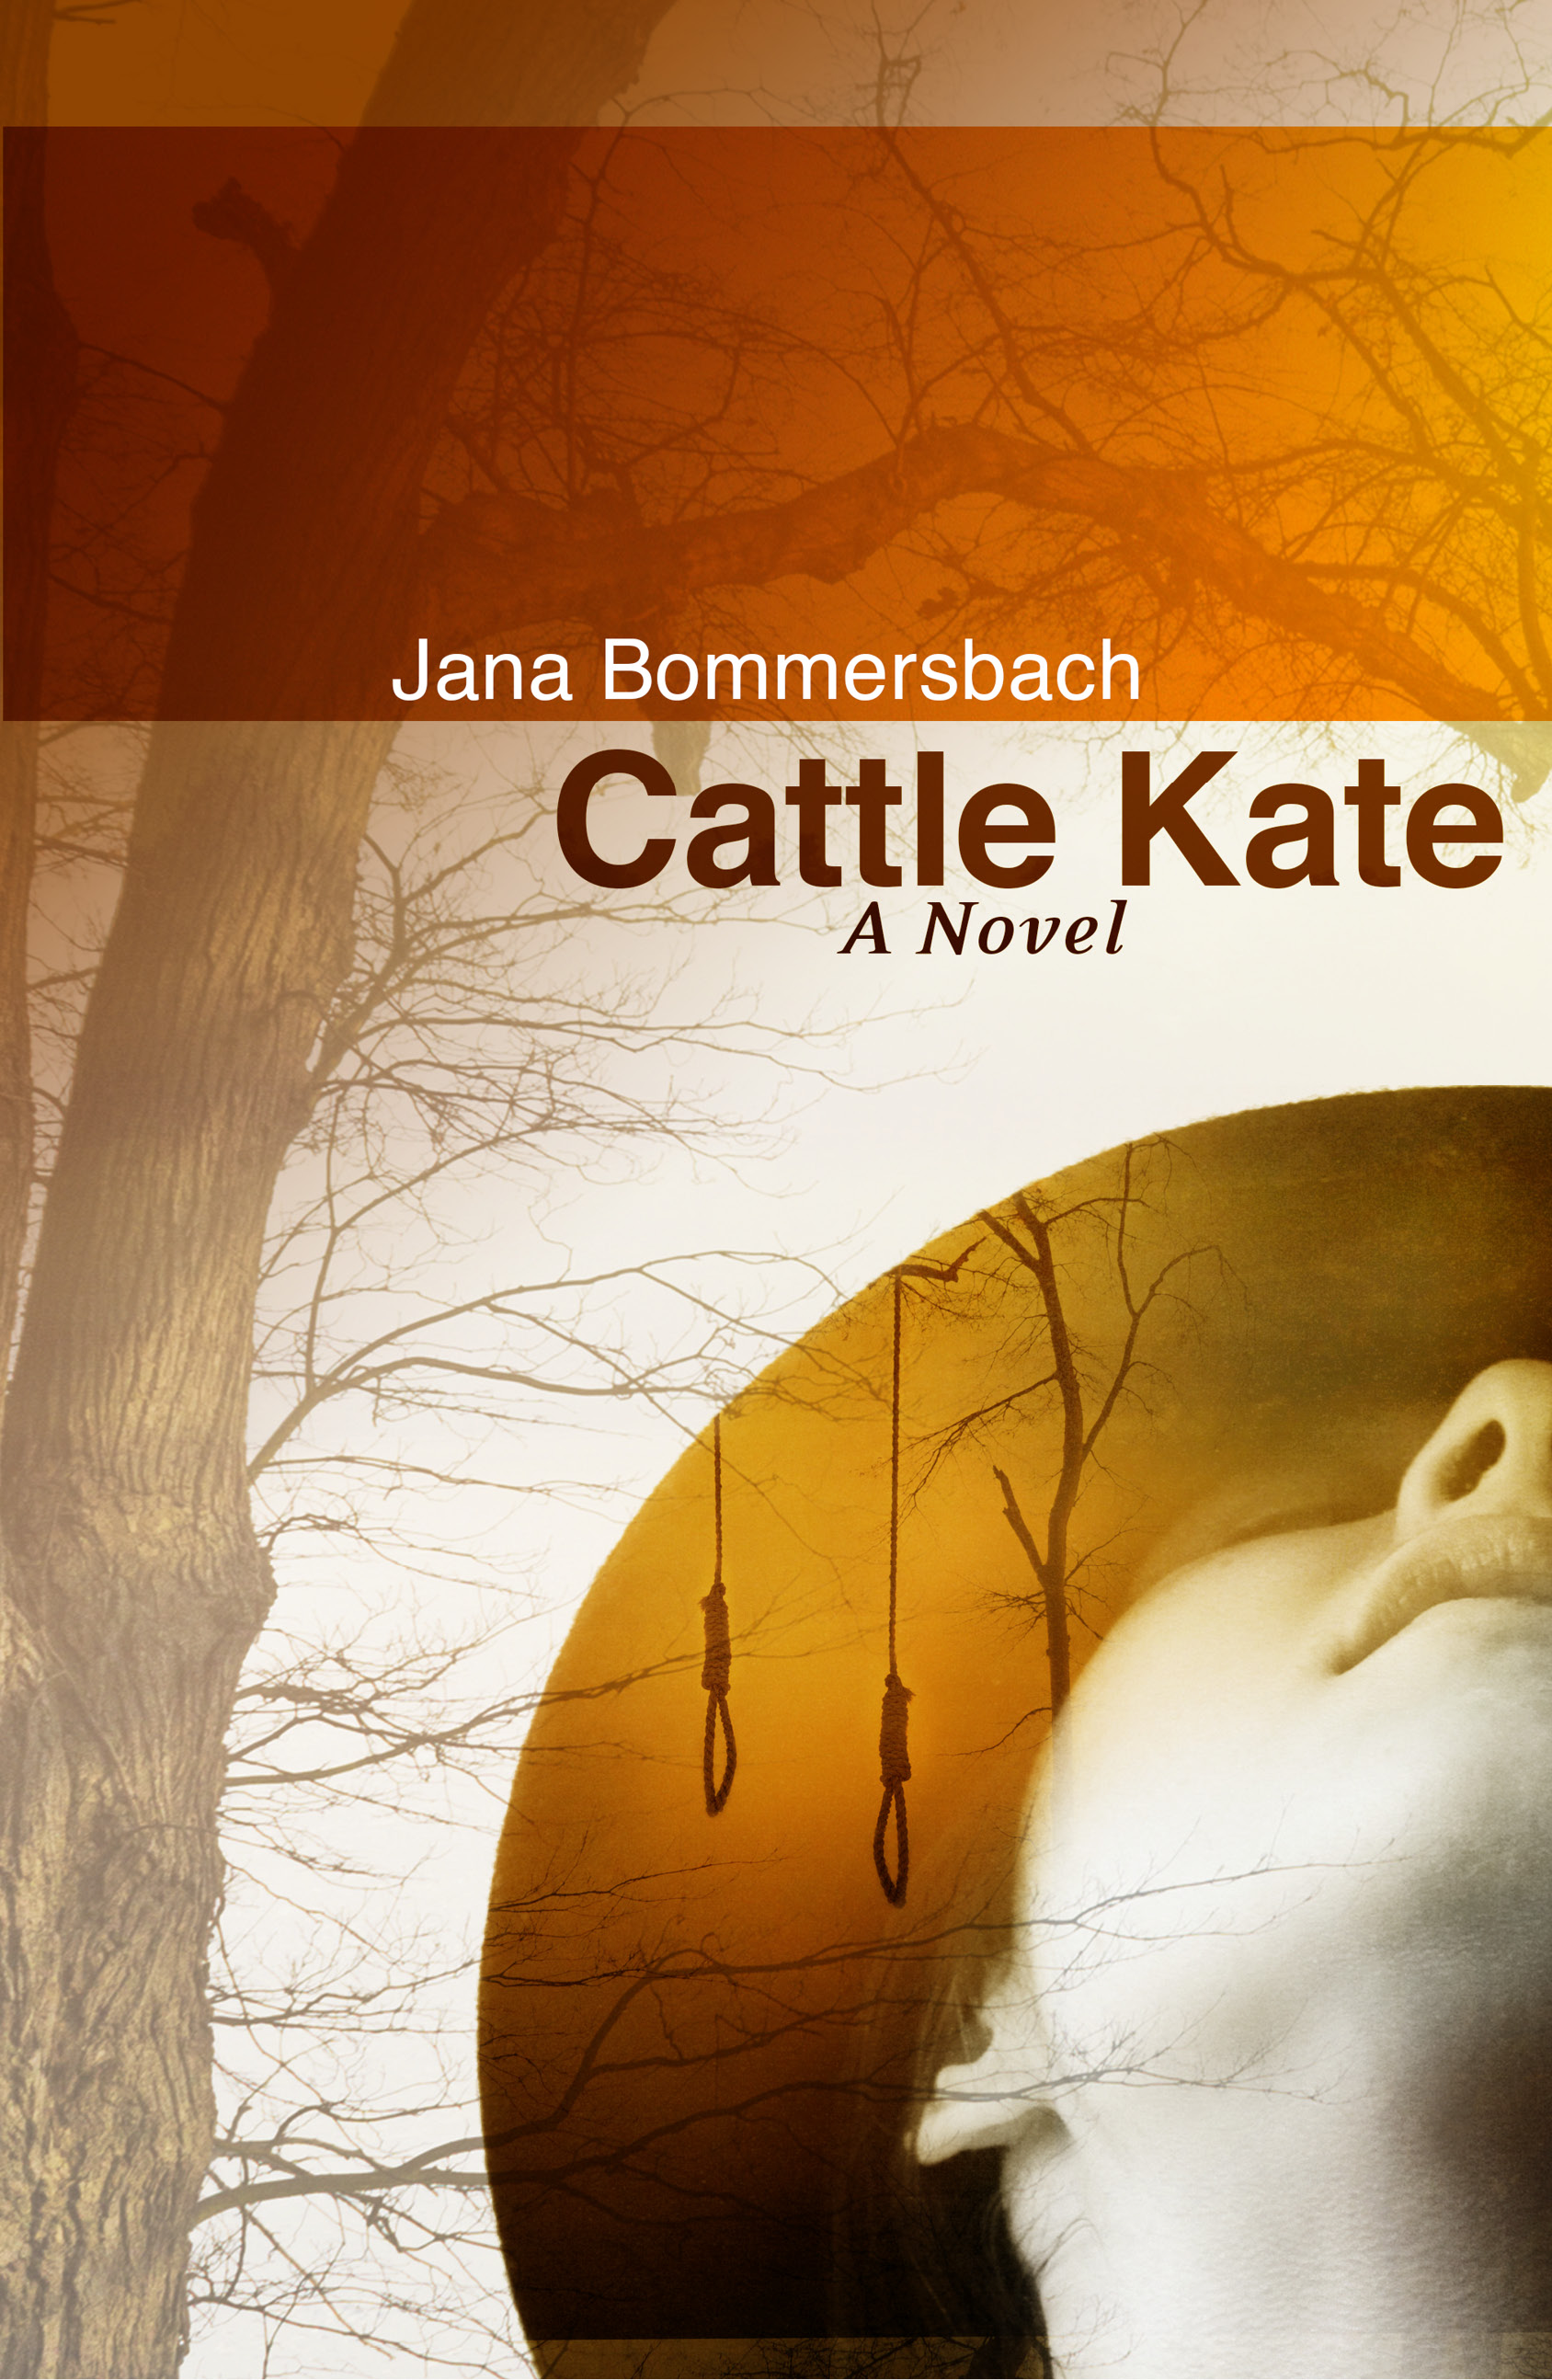 Cattle Kate by Jana Bommersbach